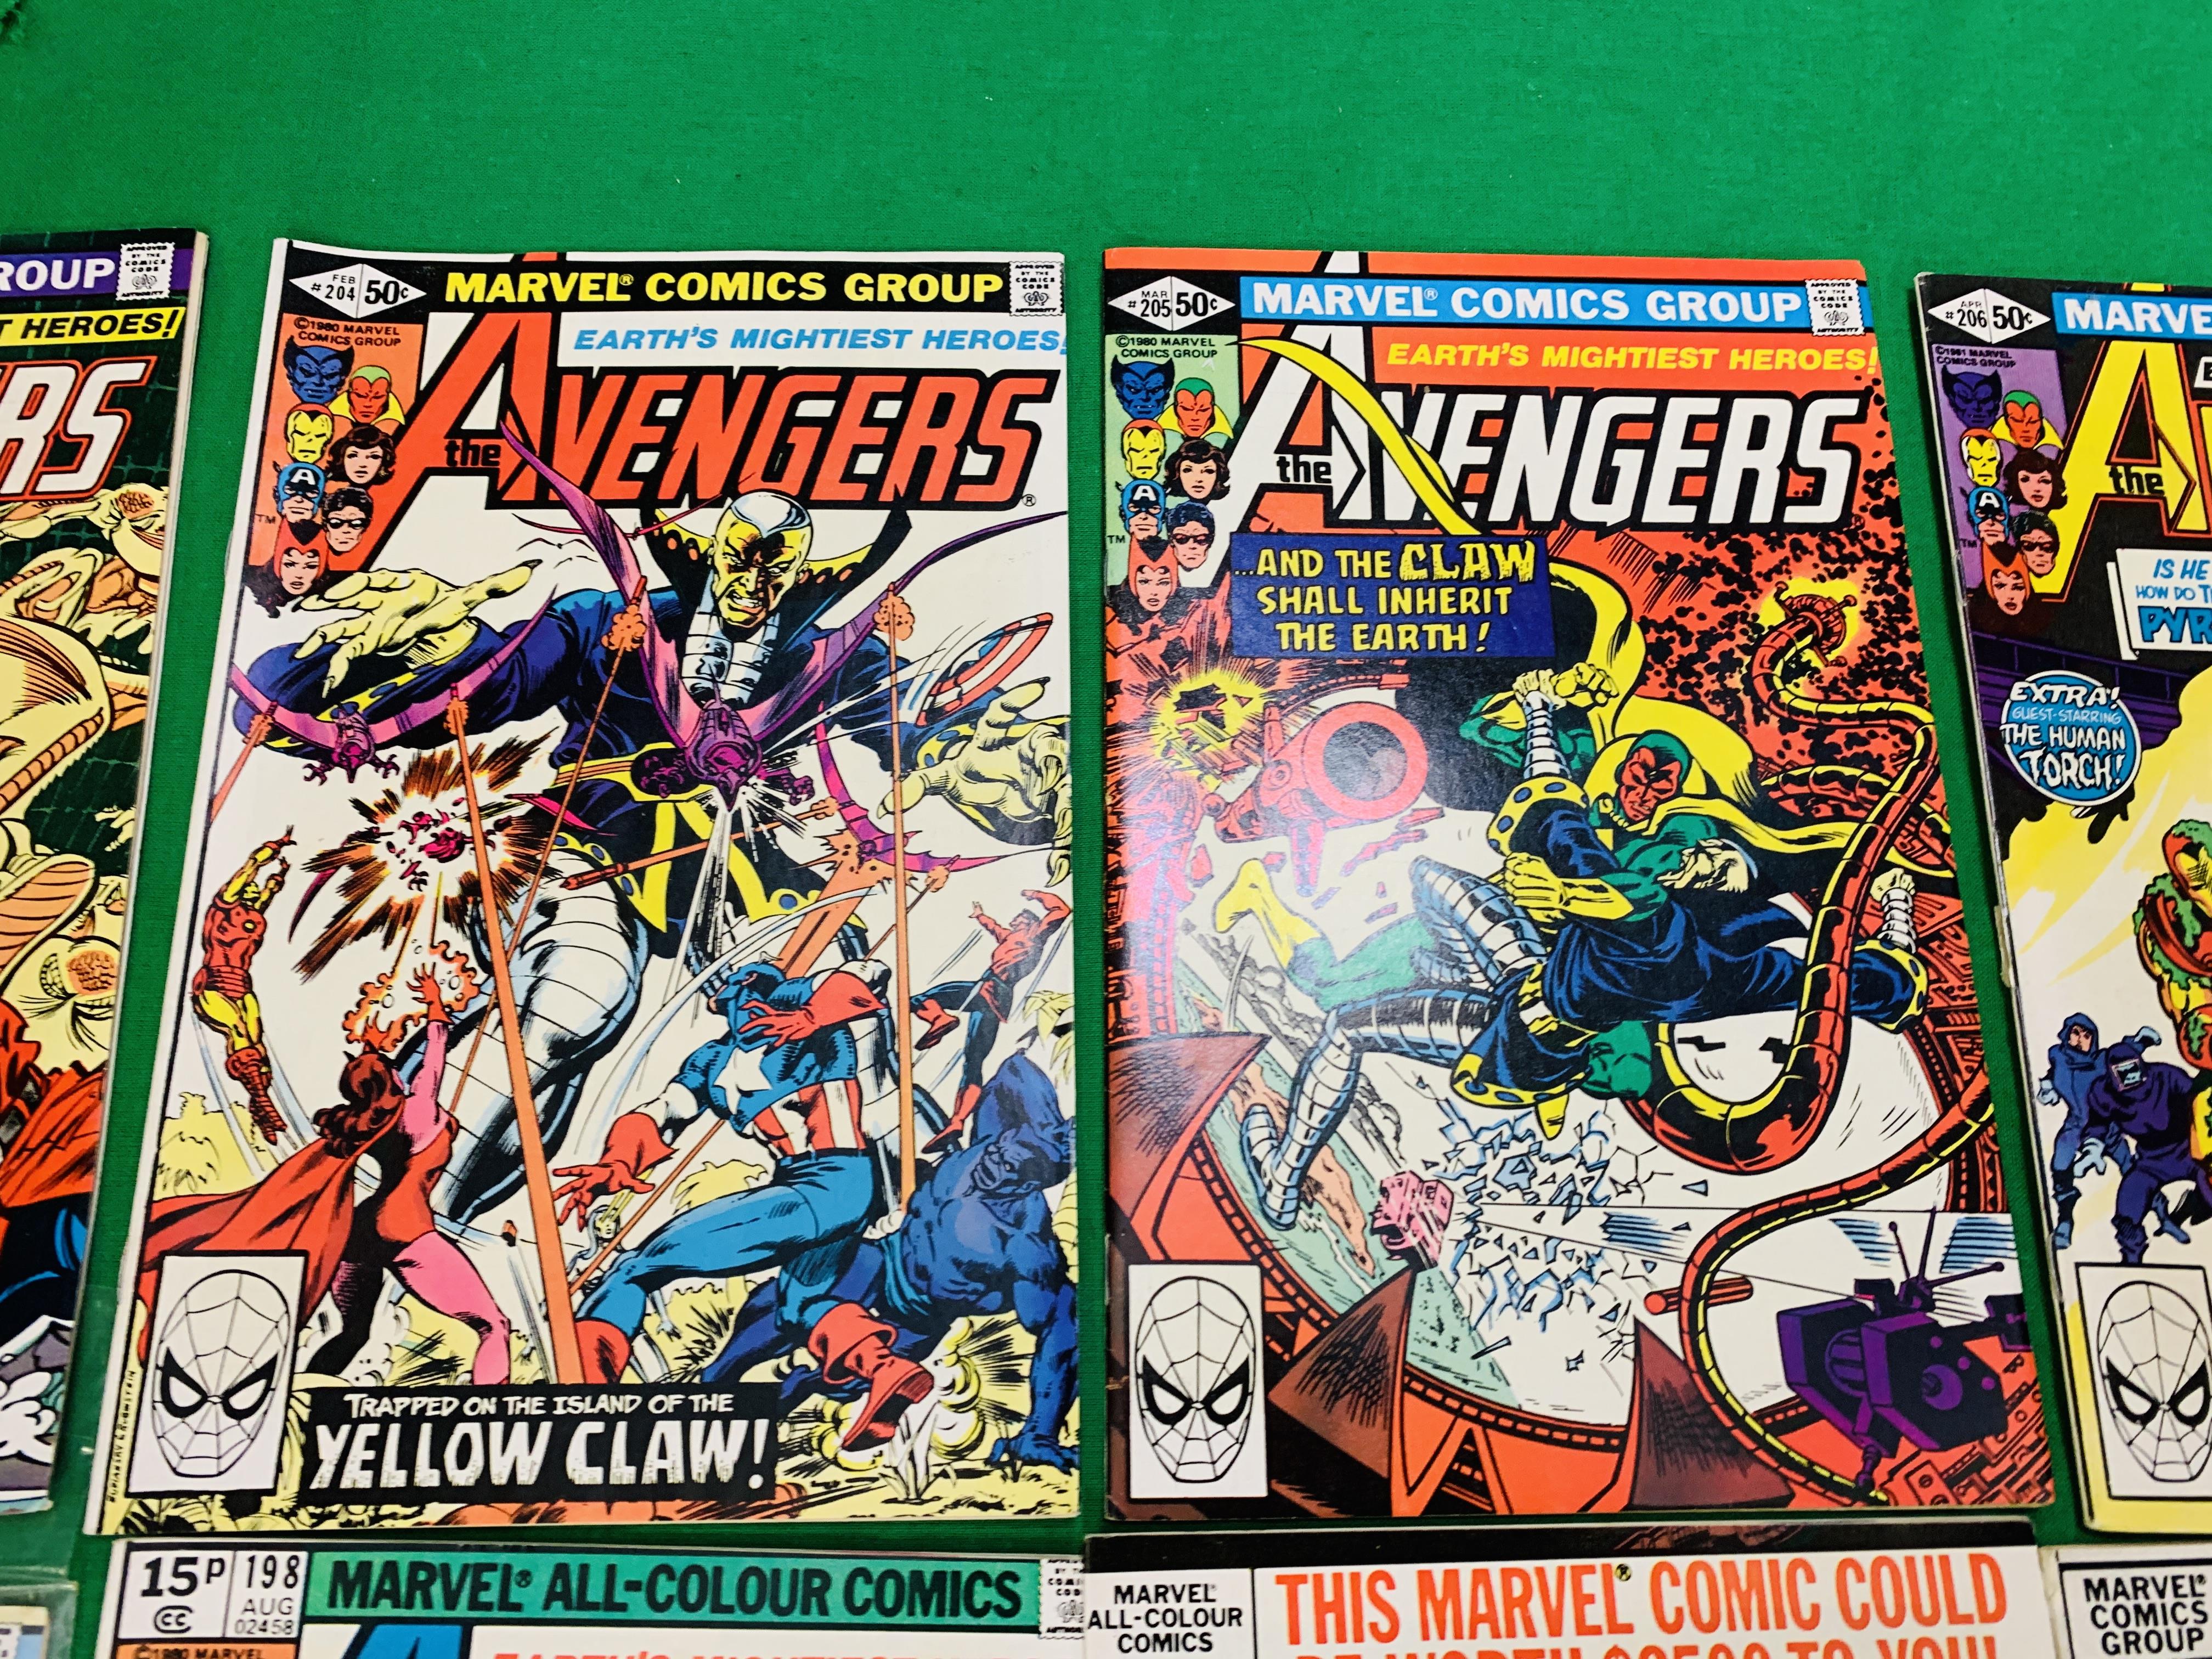 MARVEL COMICS THE AVENGERS NO. 101 - 299, MISSING ISSUES 103 AND 110. - Image 75 of 130